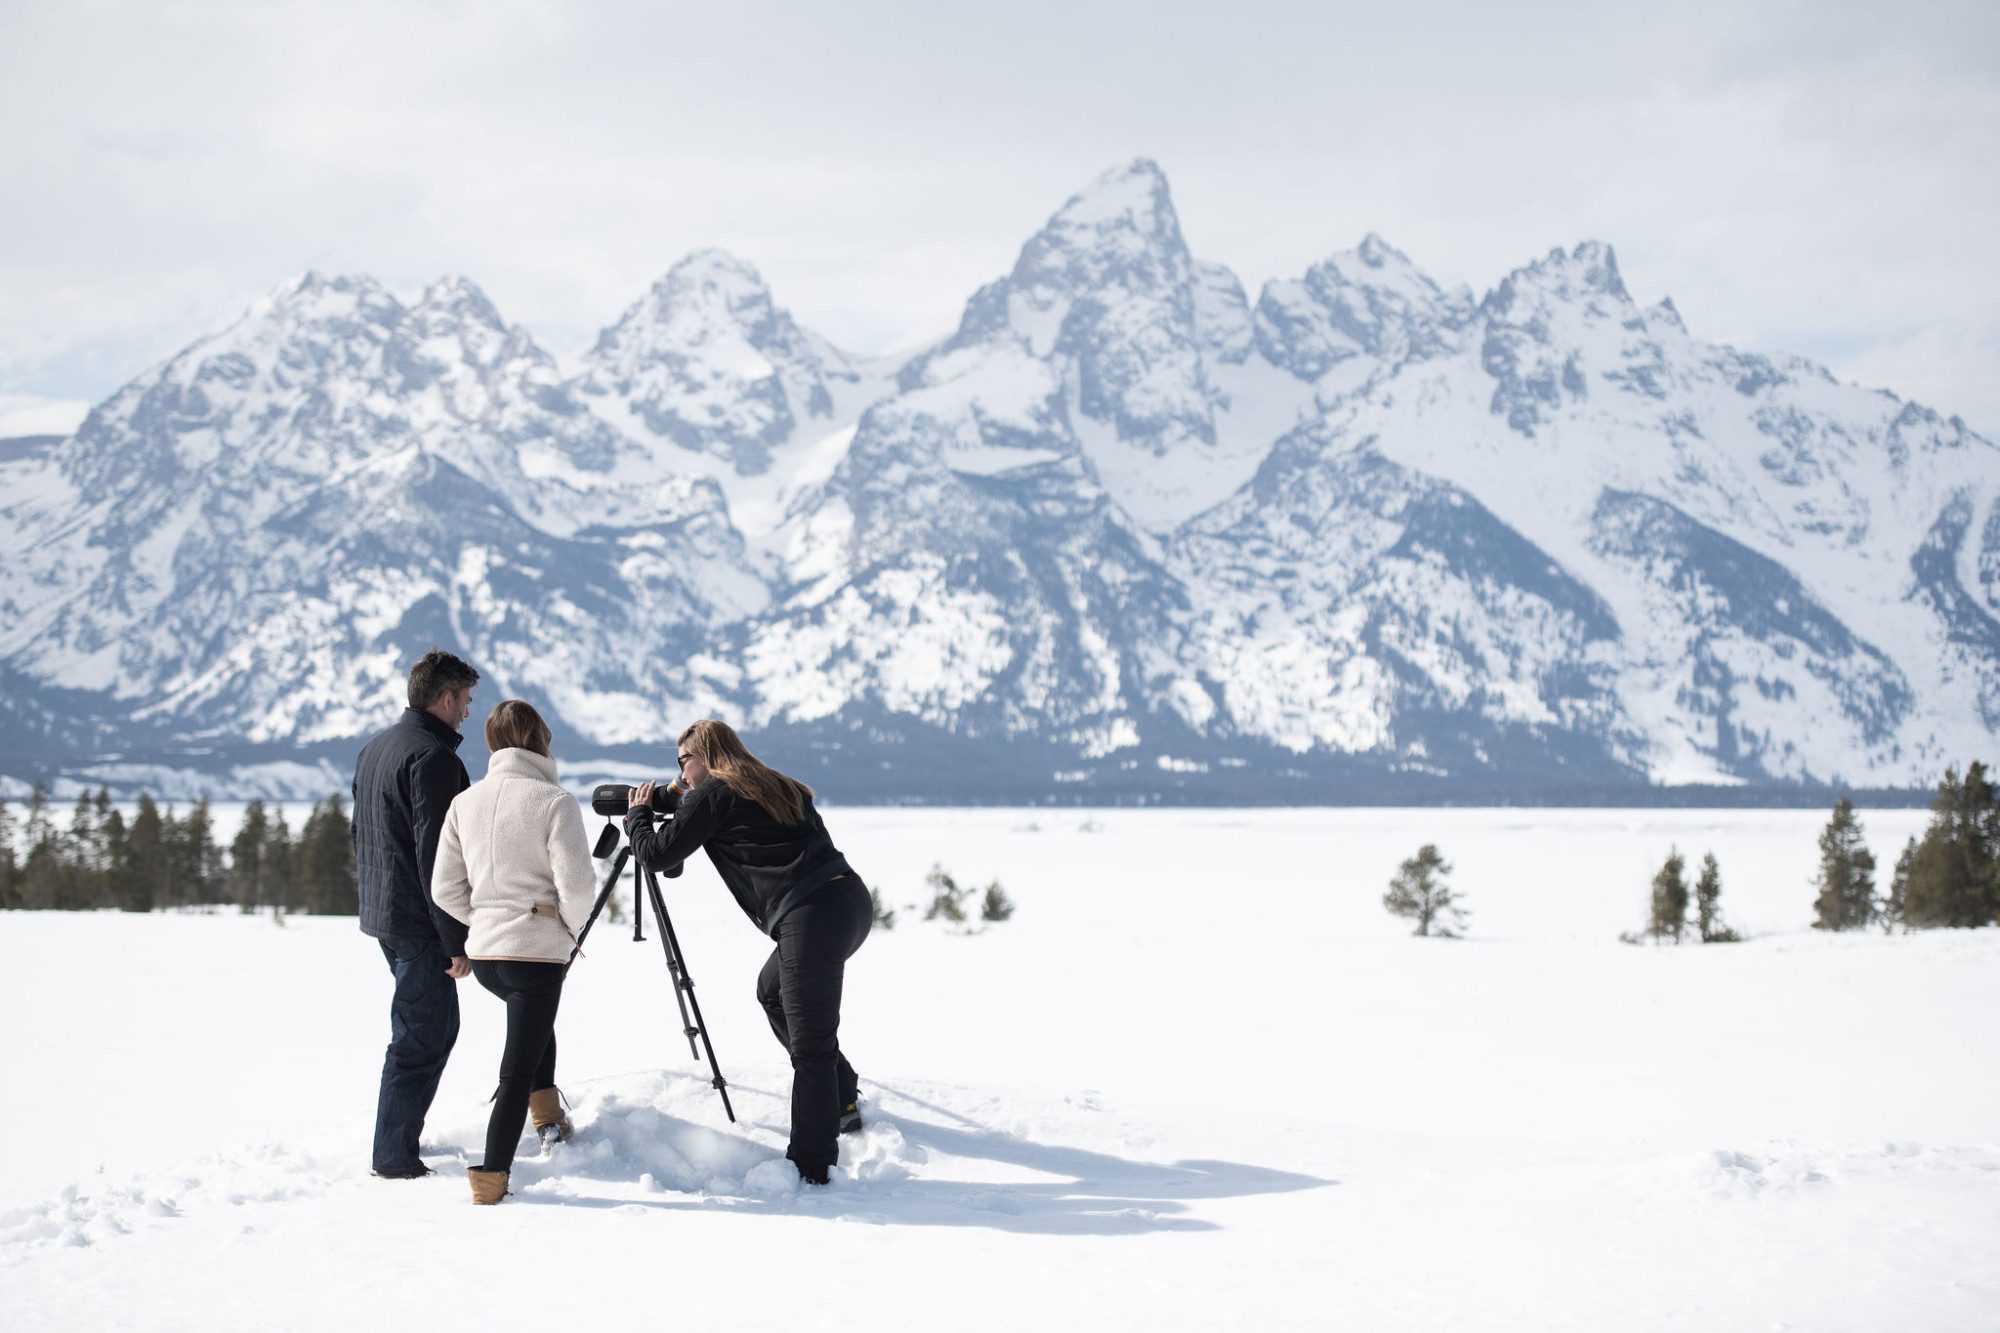 Photographing The Tetons In Winter Lifestyle.